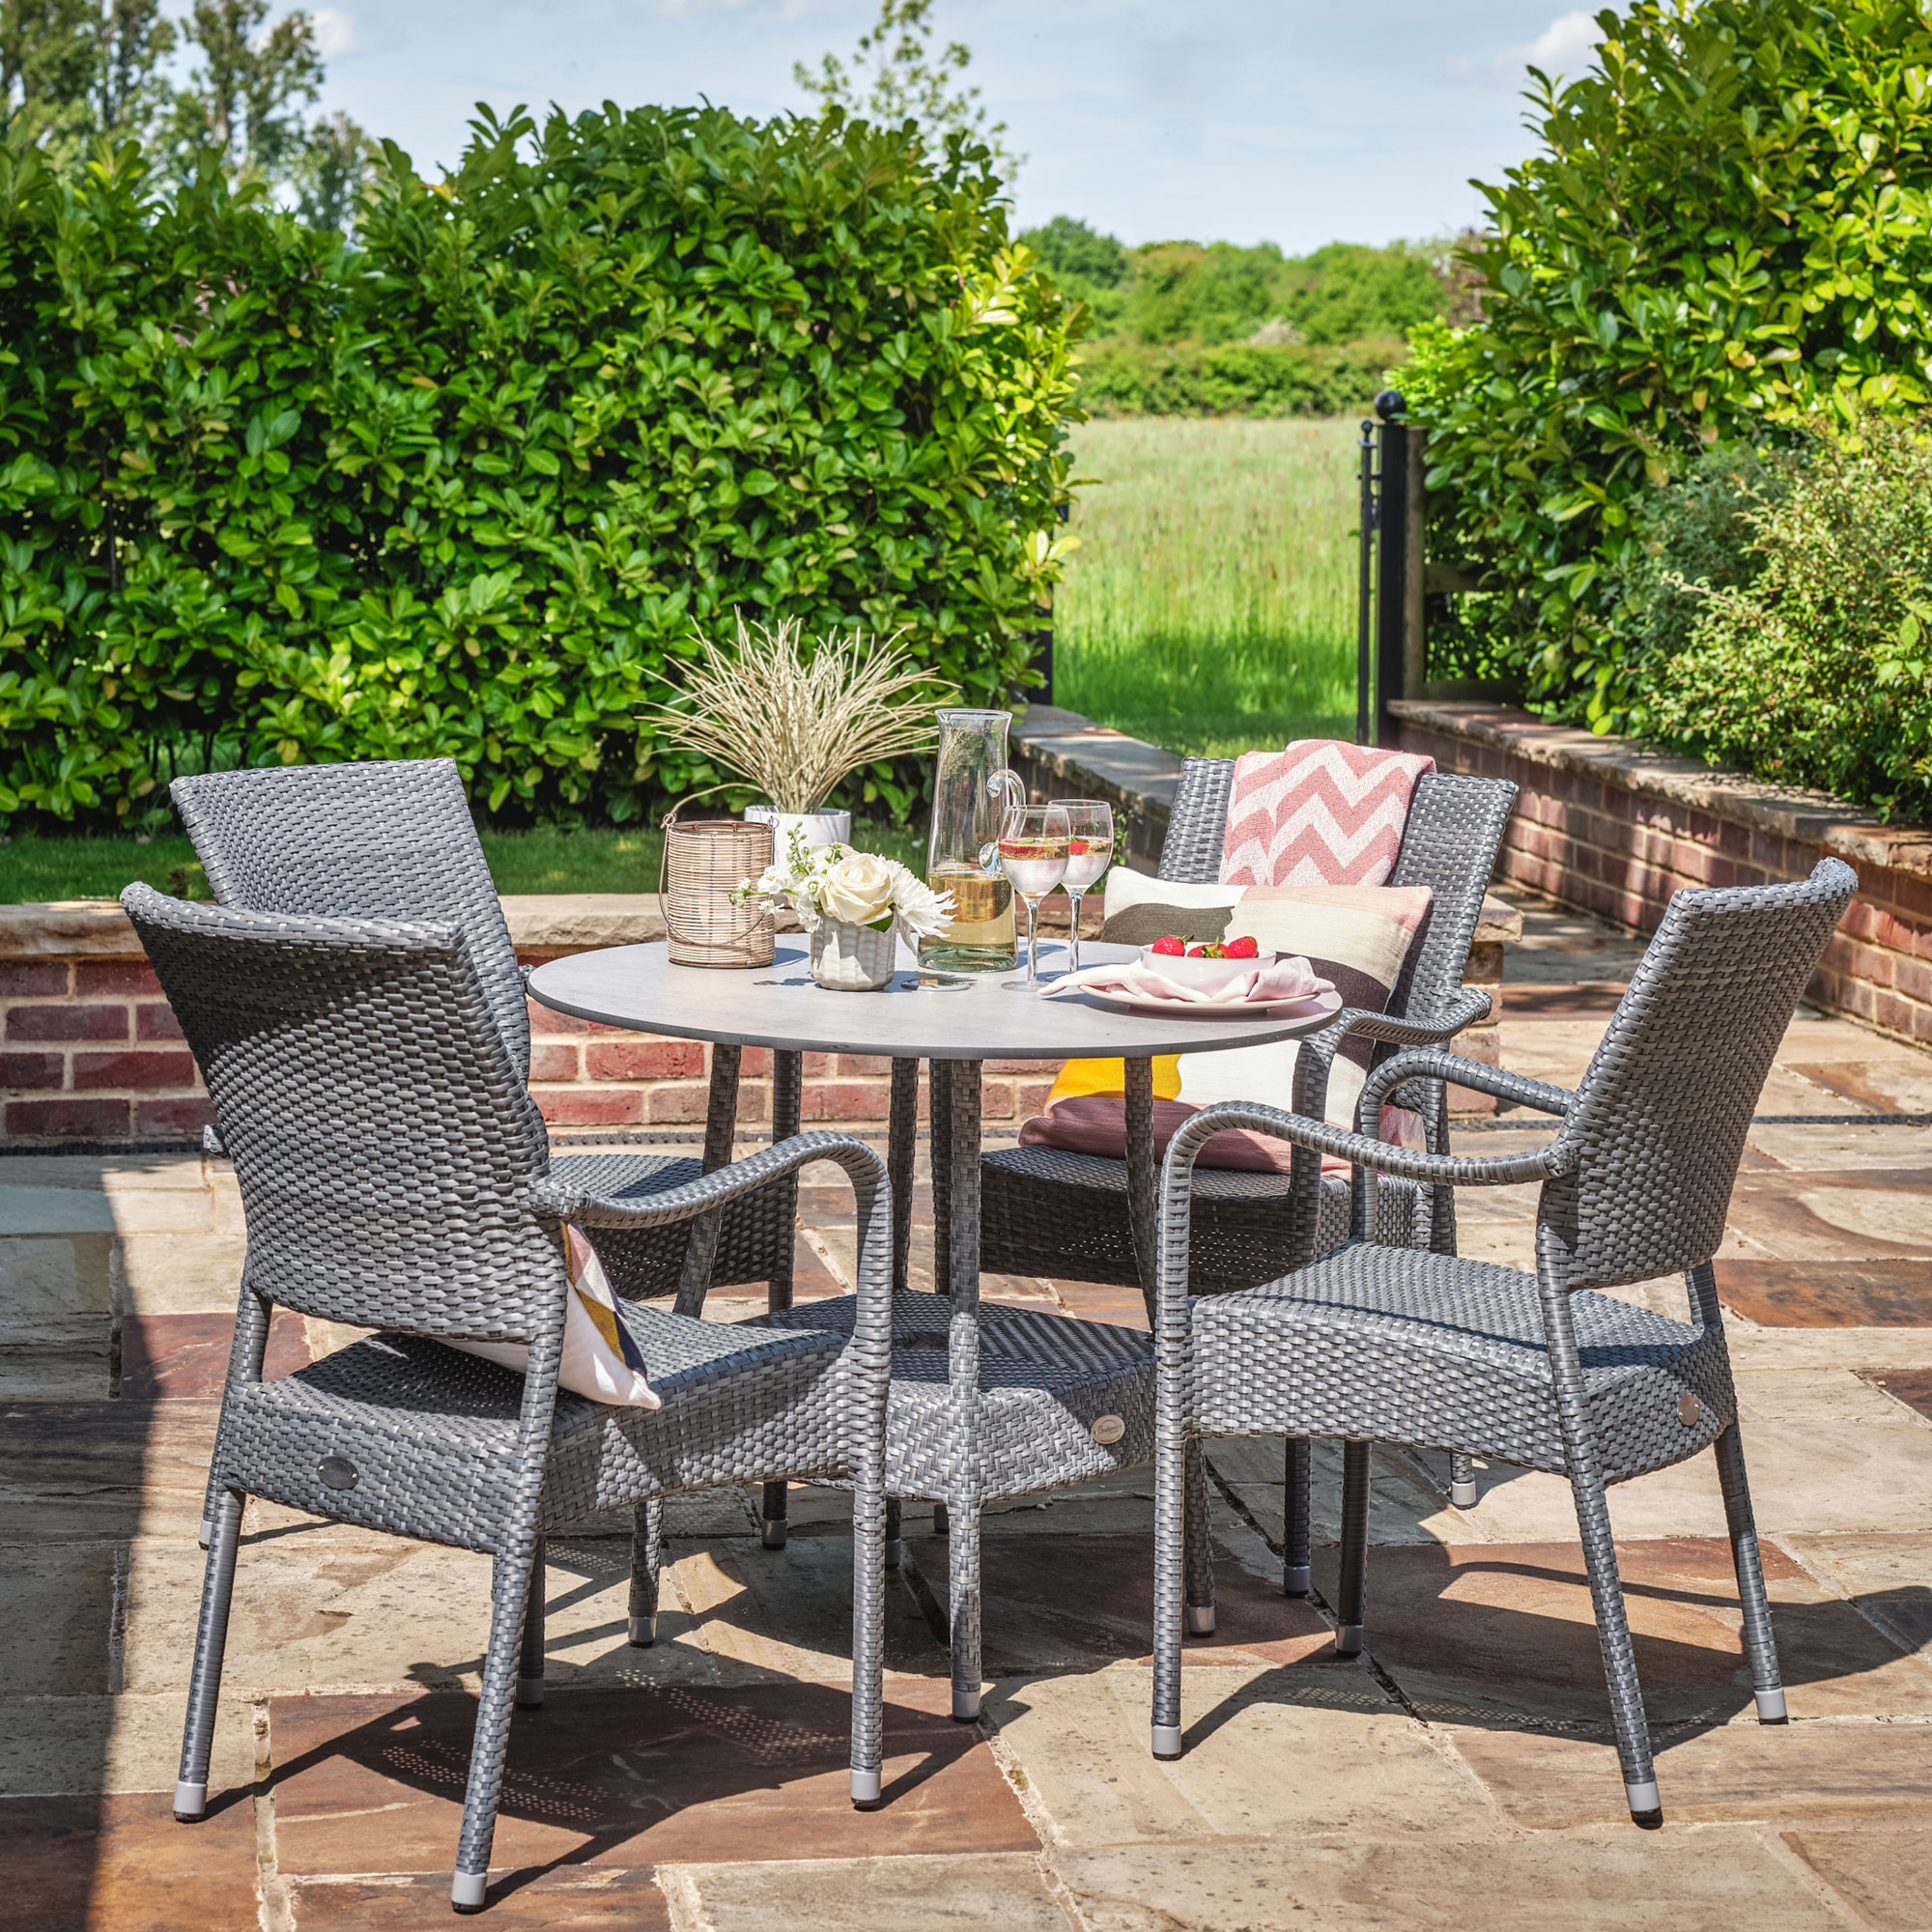 Patio furniture in small garden of four chairs and dining table